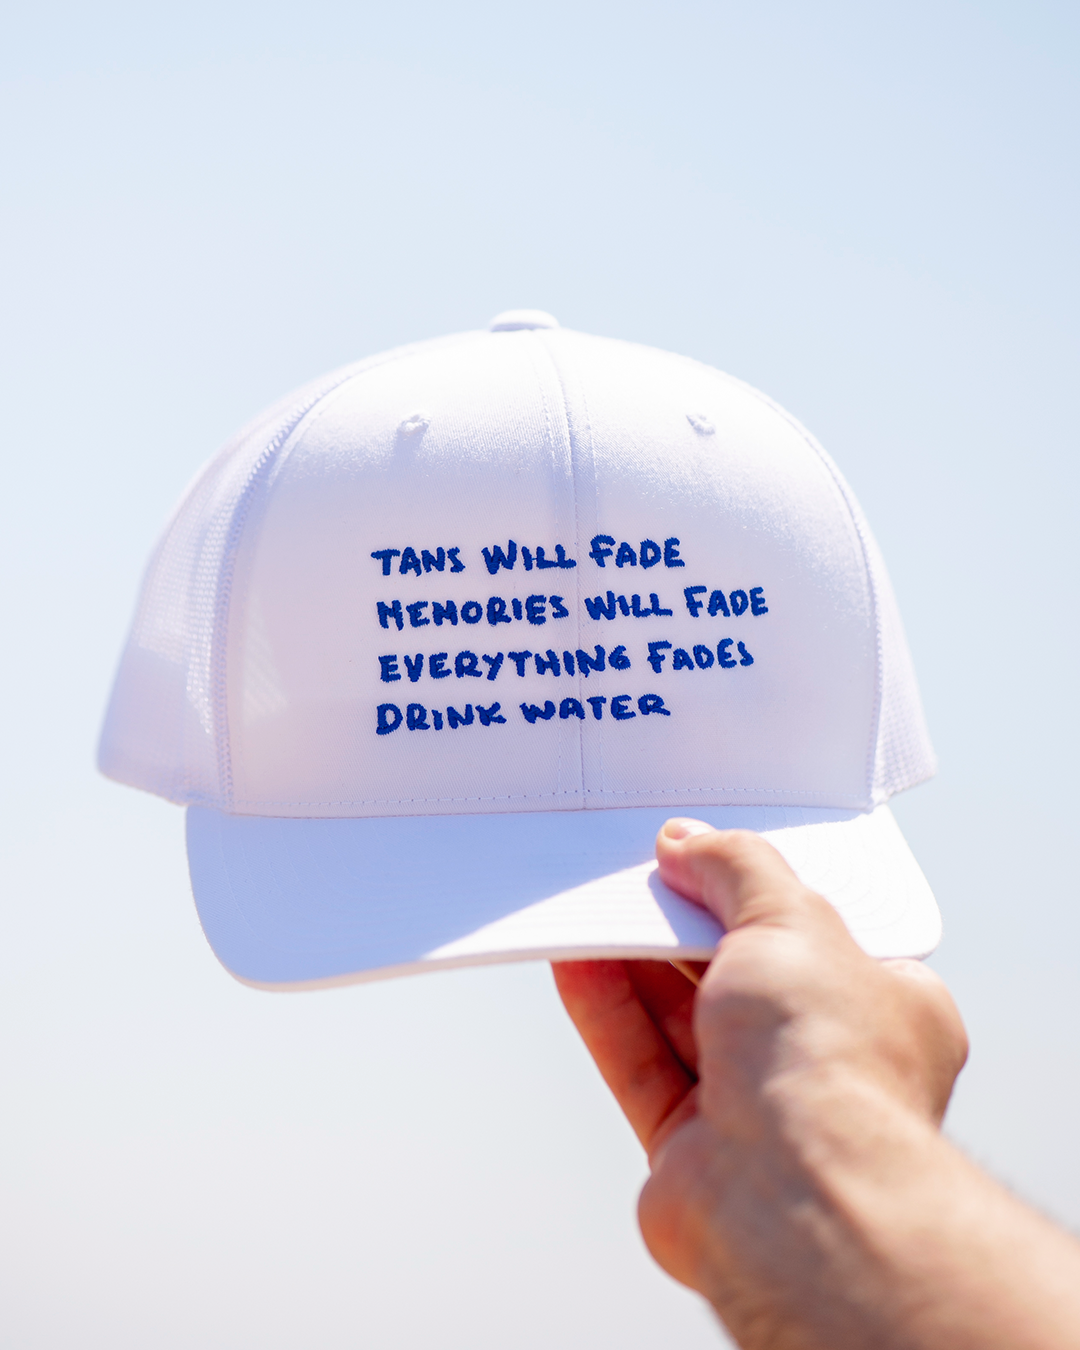 funnt, witty, humorous quote on white summer hat. Perfect for gift.